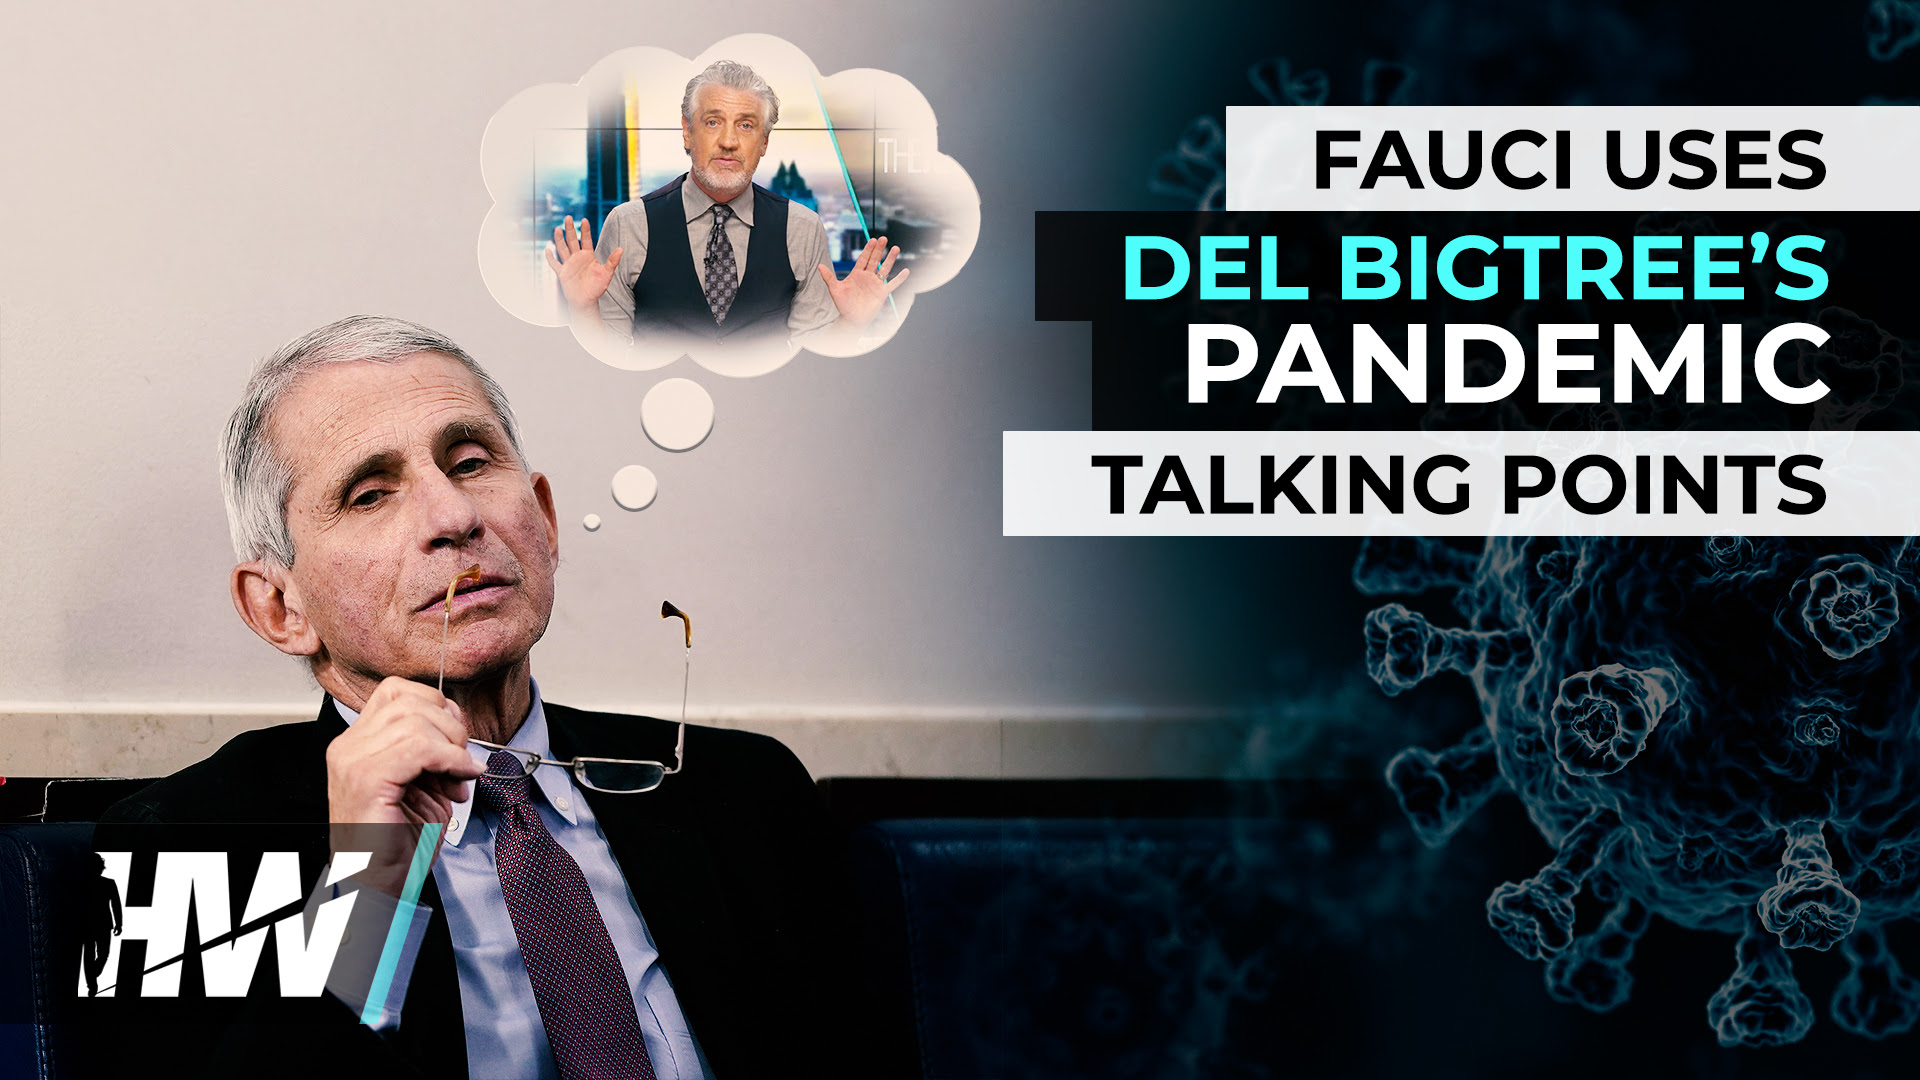 FAUCI USES DEL
                                  BIGTREE'S PANDEMIC TALKING POINTS